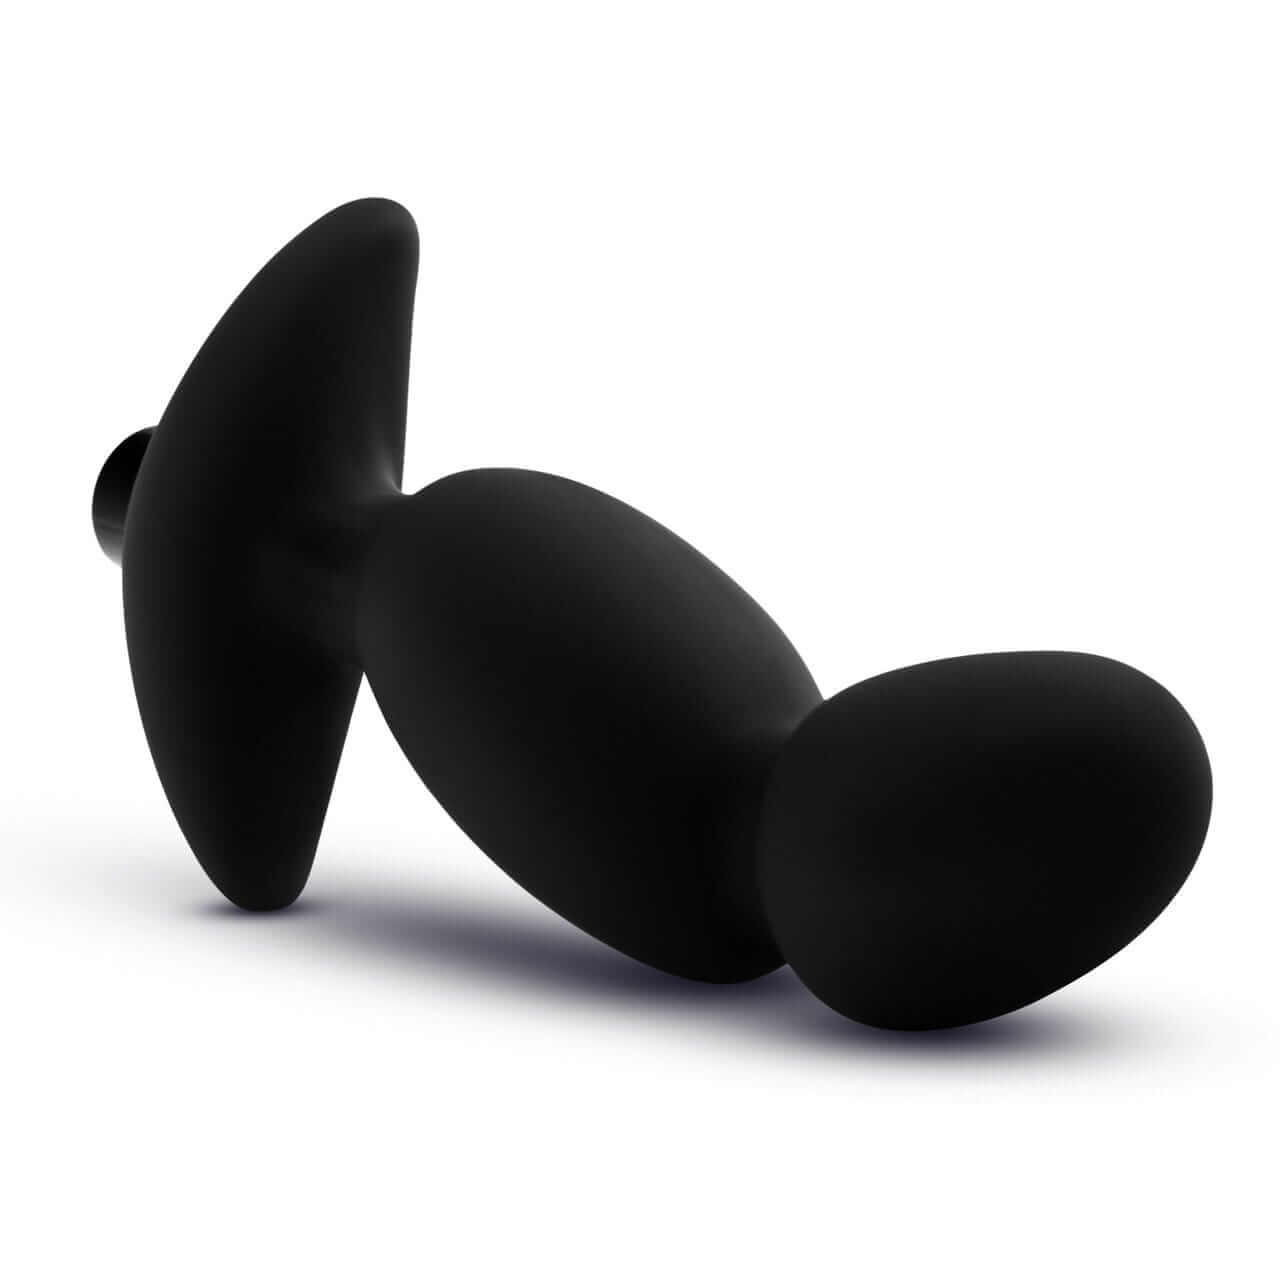 Silicone Vibrating Prostate Massager 04 - Black - Thorn & Feather Sex Toy Canada